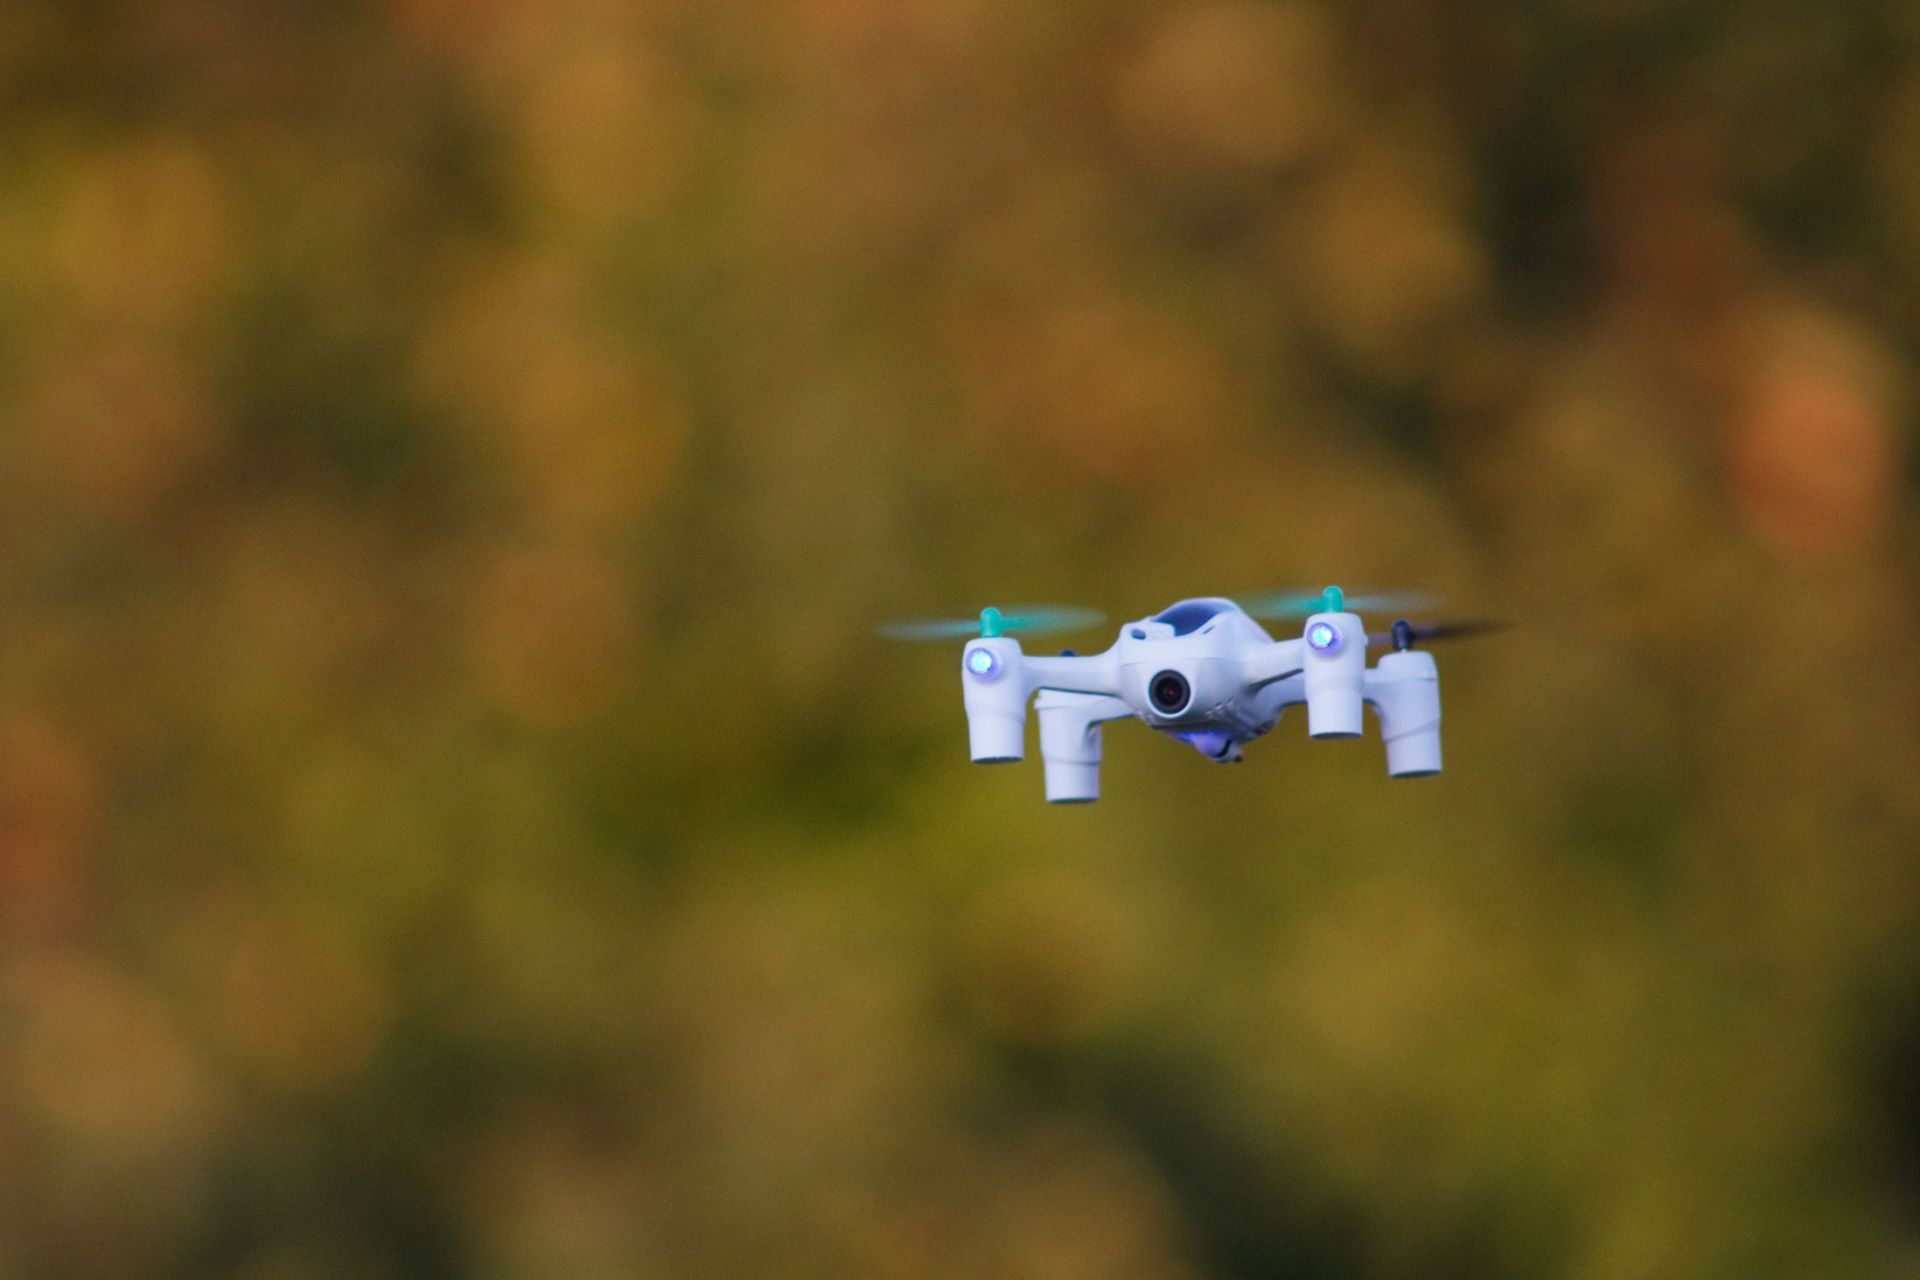 A small white drone in focus with a blurred background of orange tones